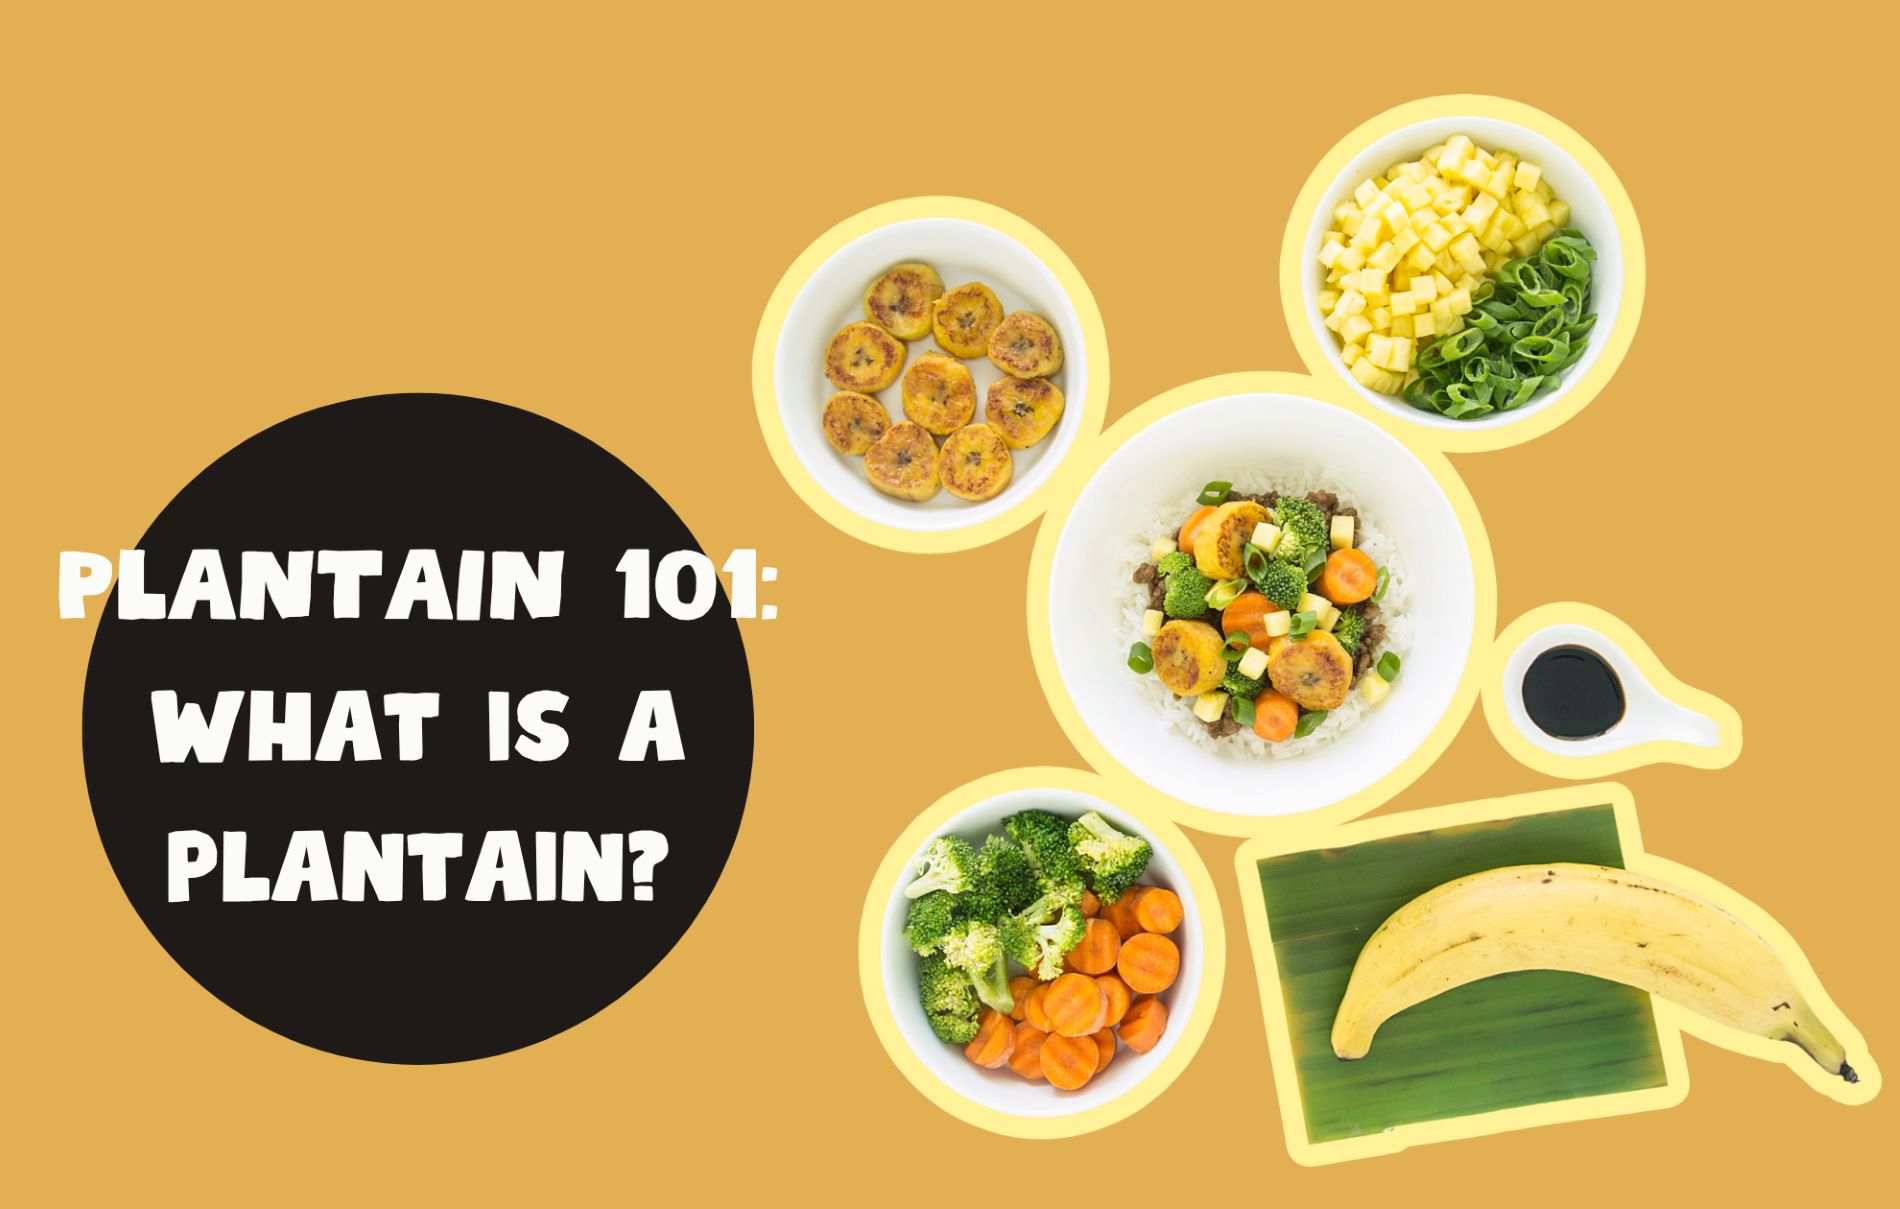 Plantain 101: What Is A Plantain?